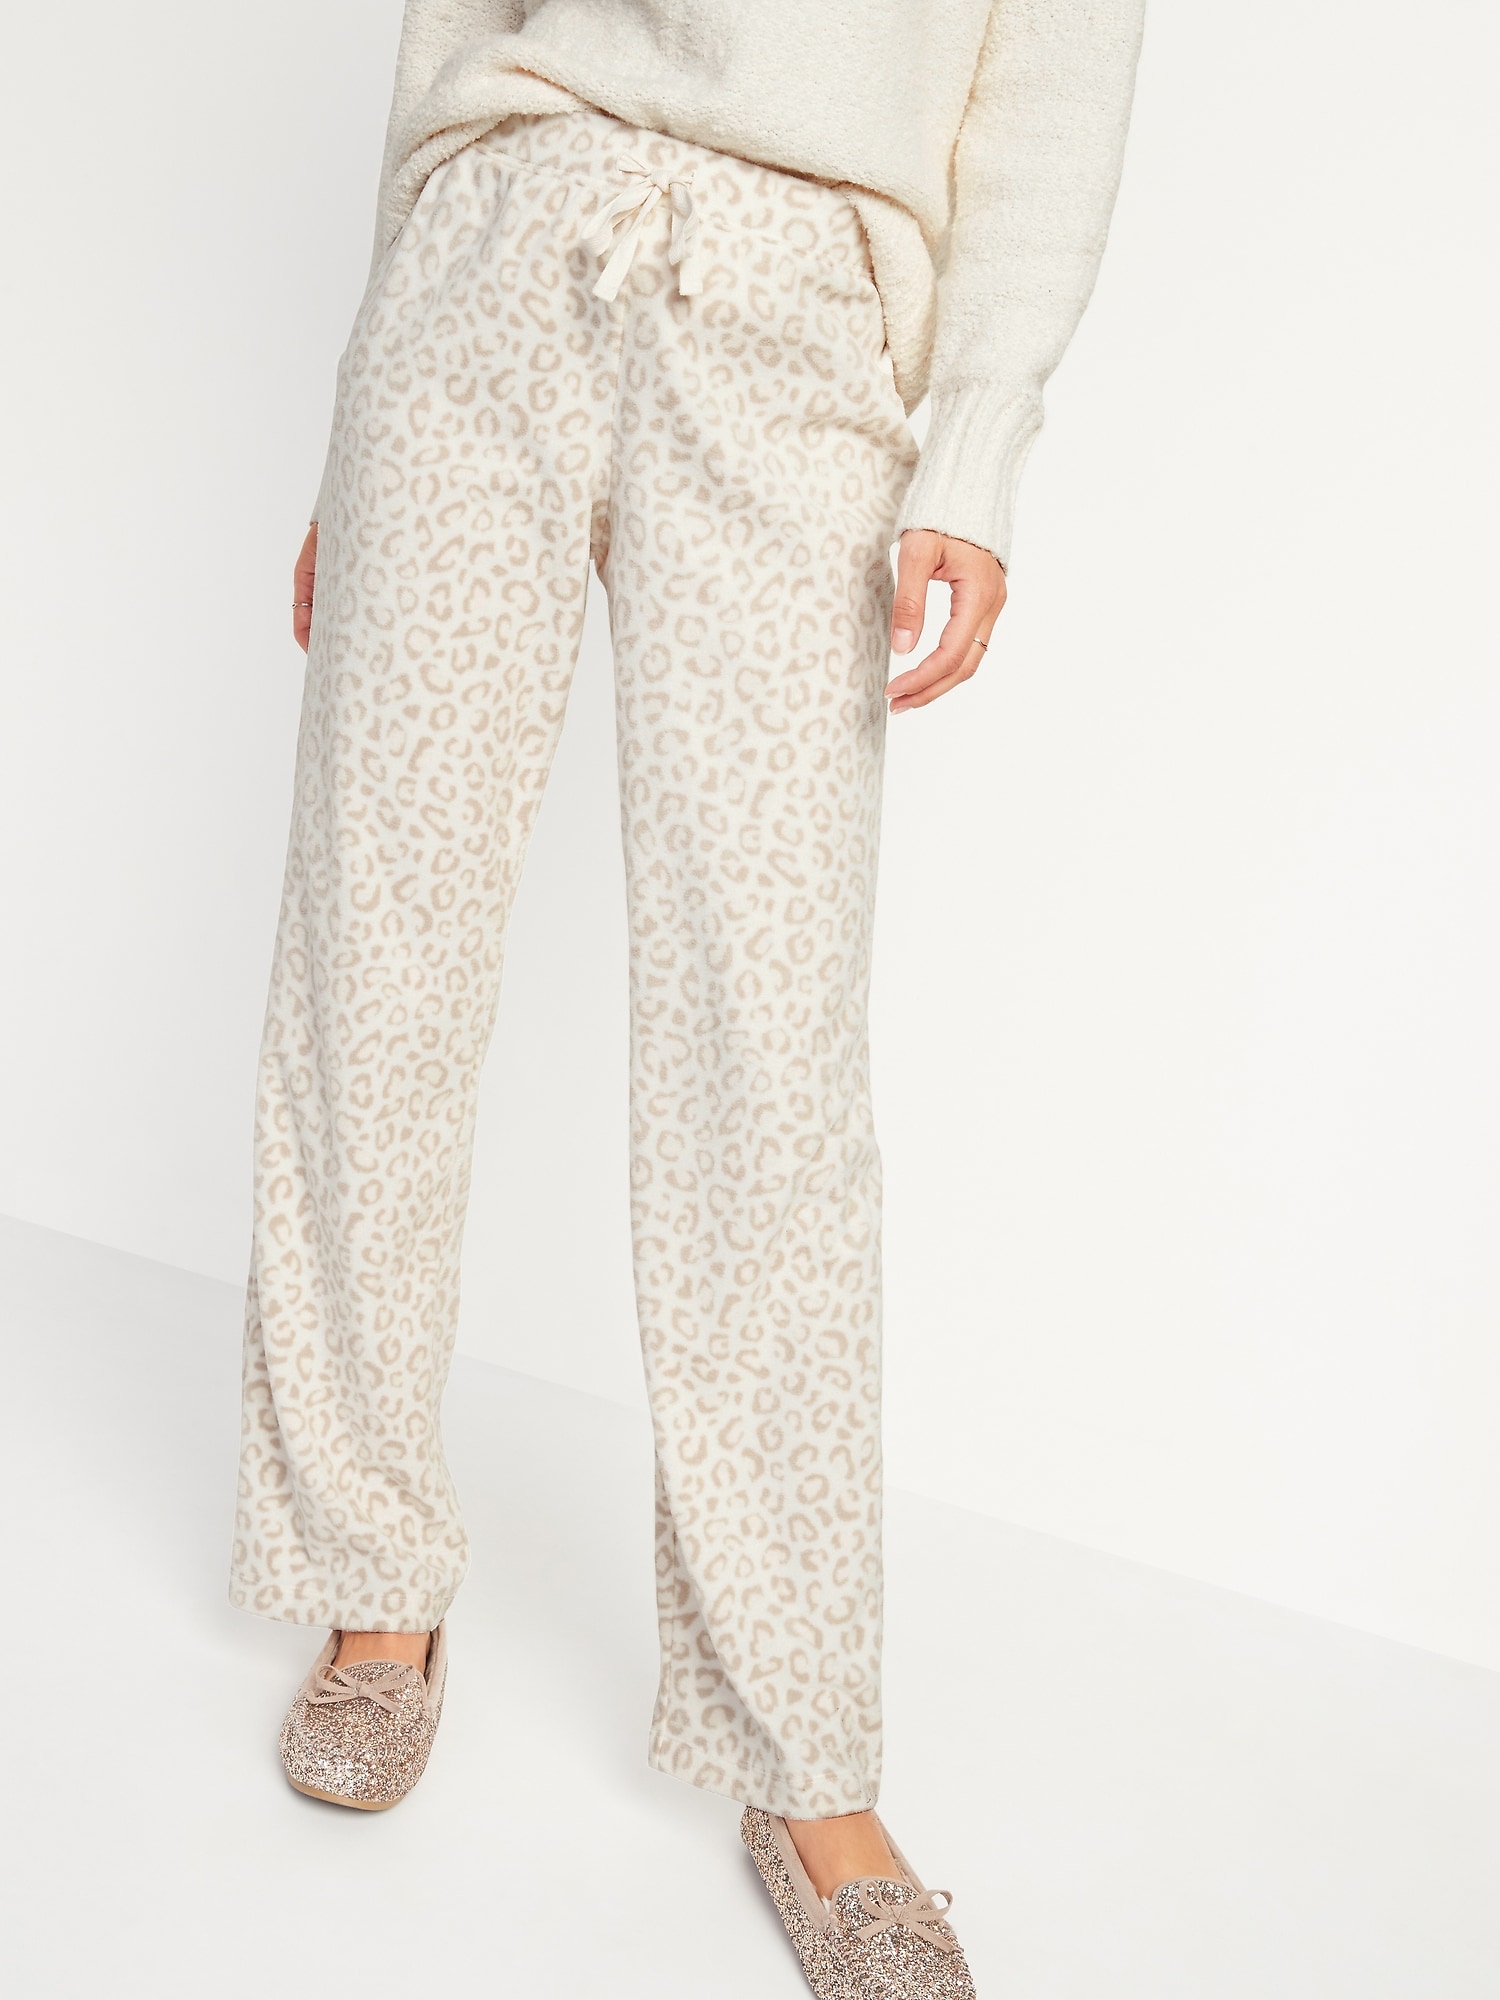 Mid-Rise Patterned Micro Performance Fleece Pajama Pants for Women